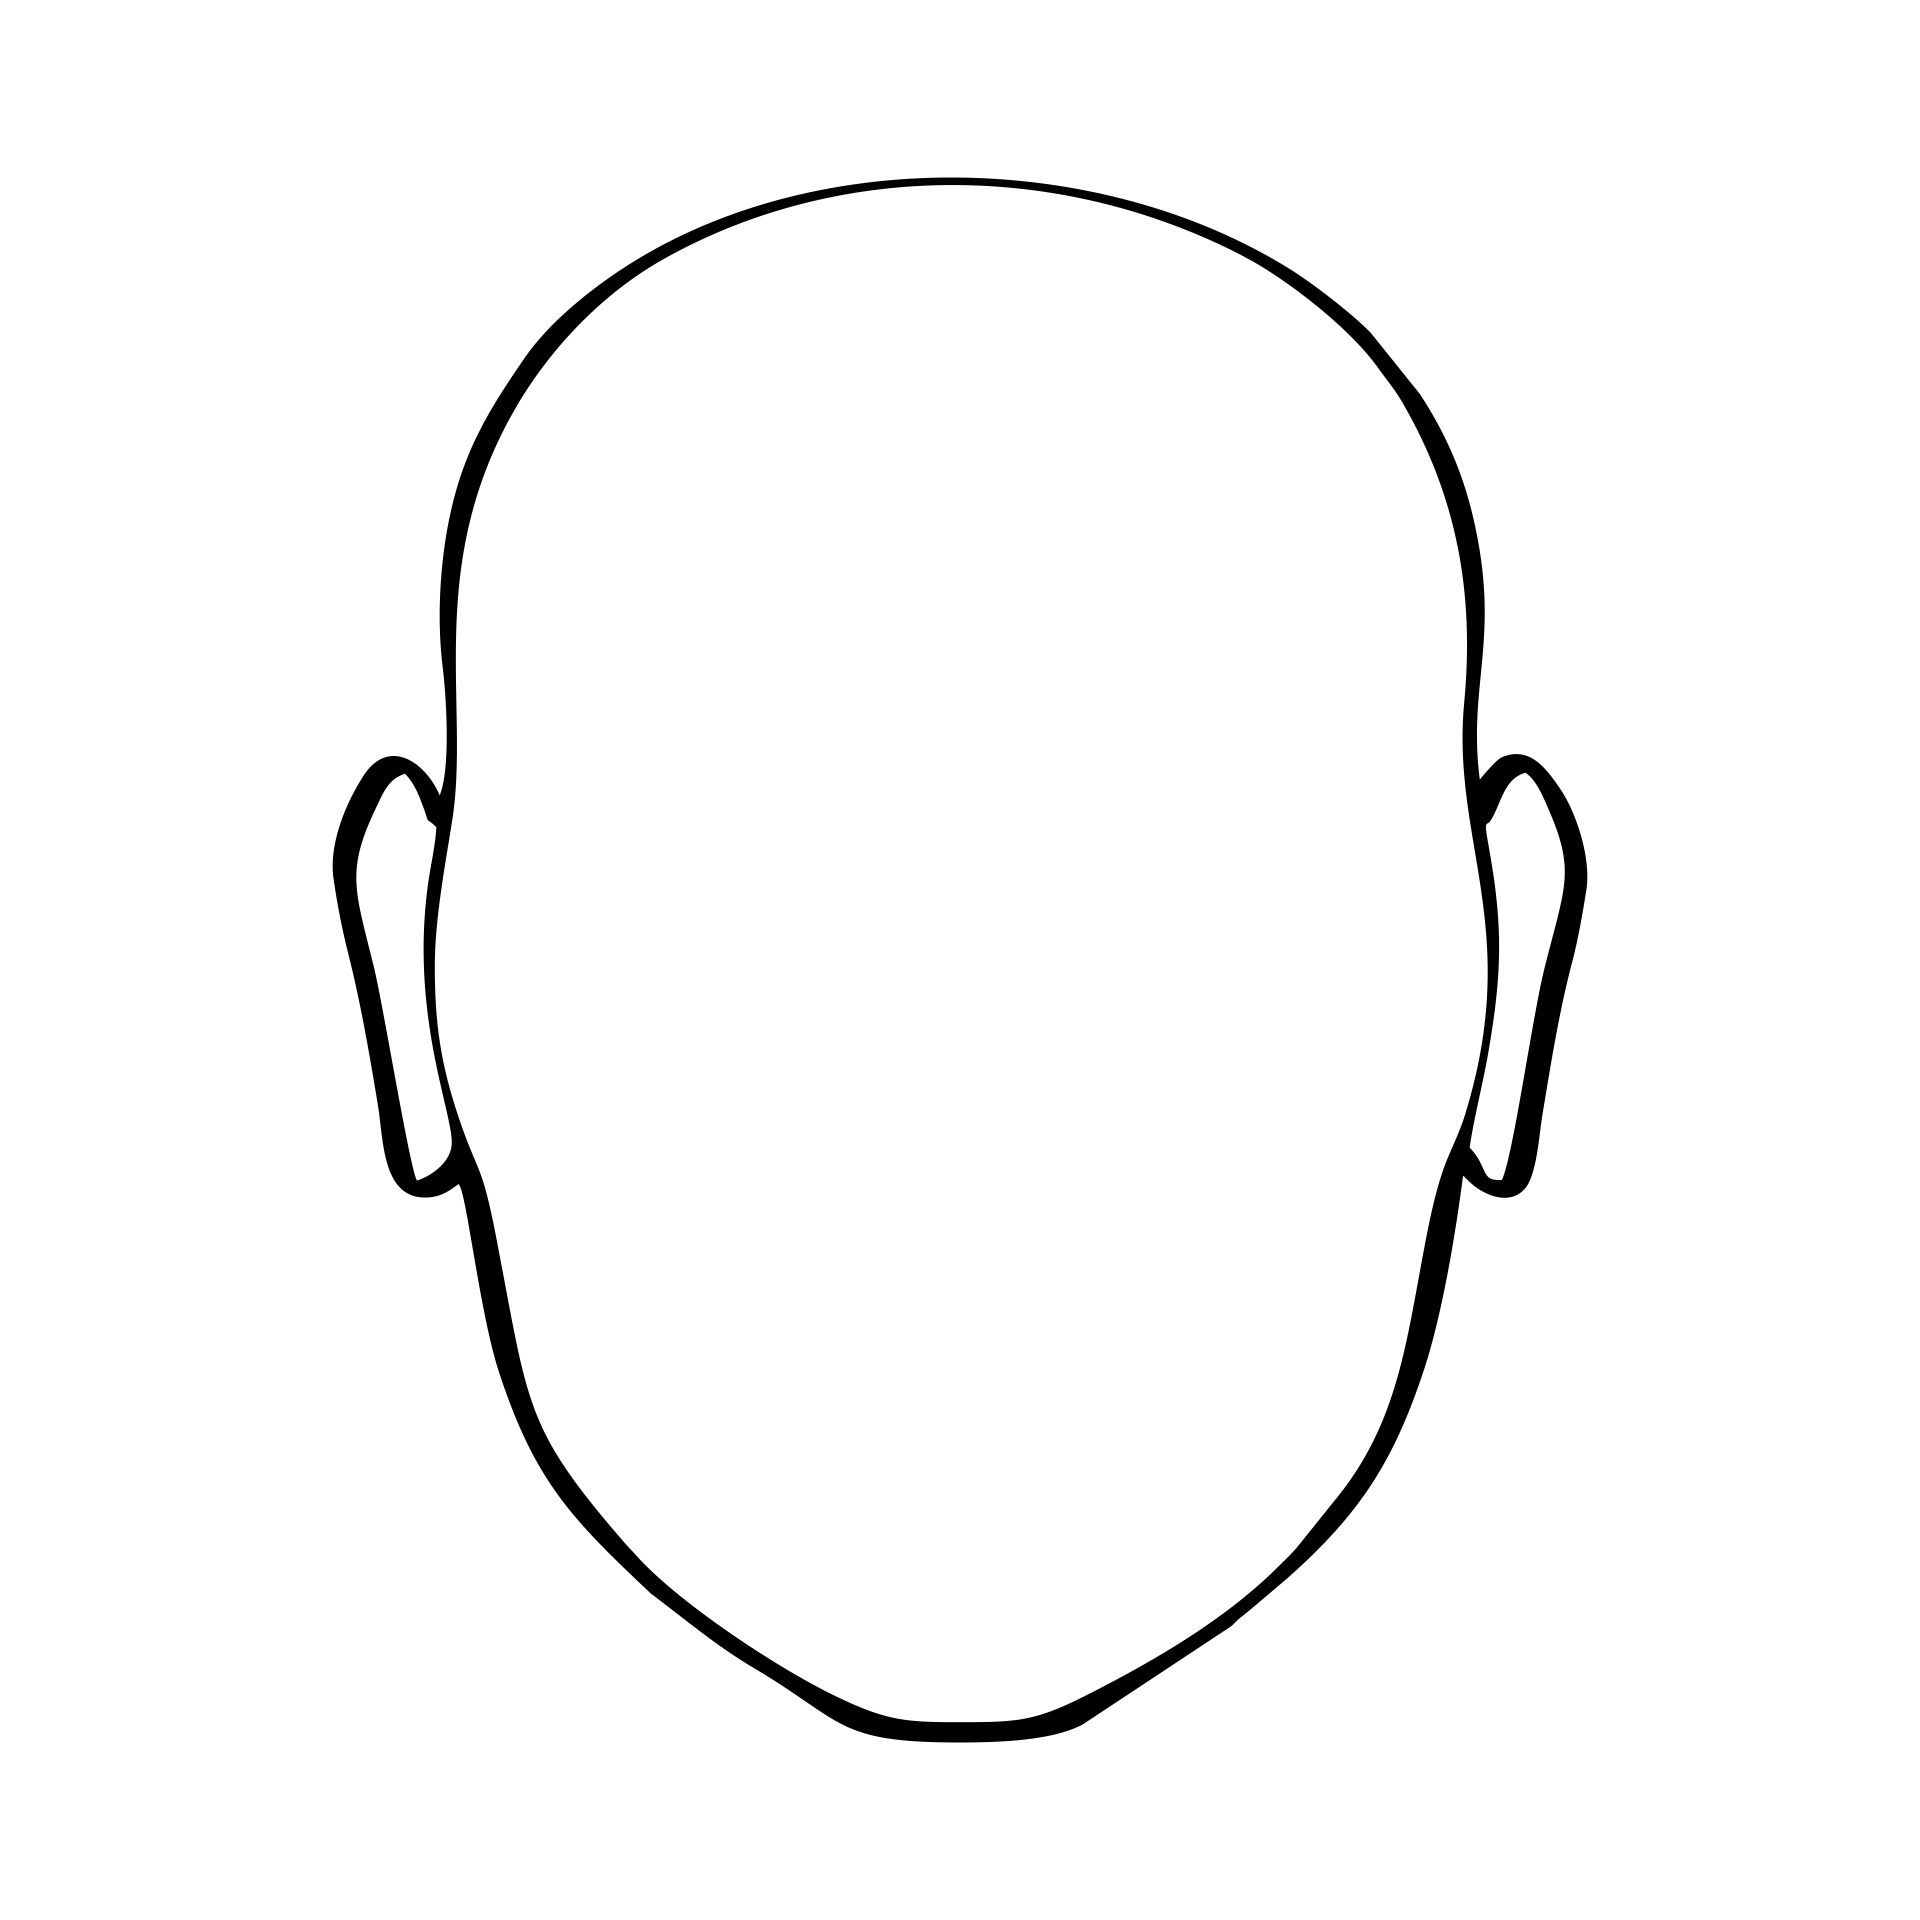 6 Best Images of Head Template Printable Human Head